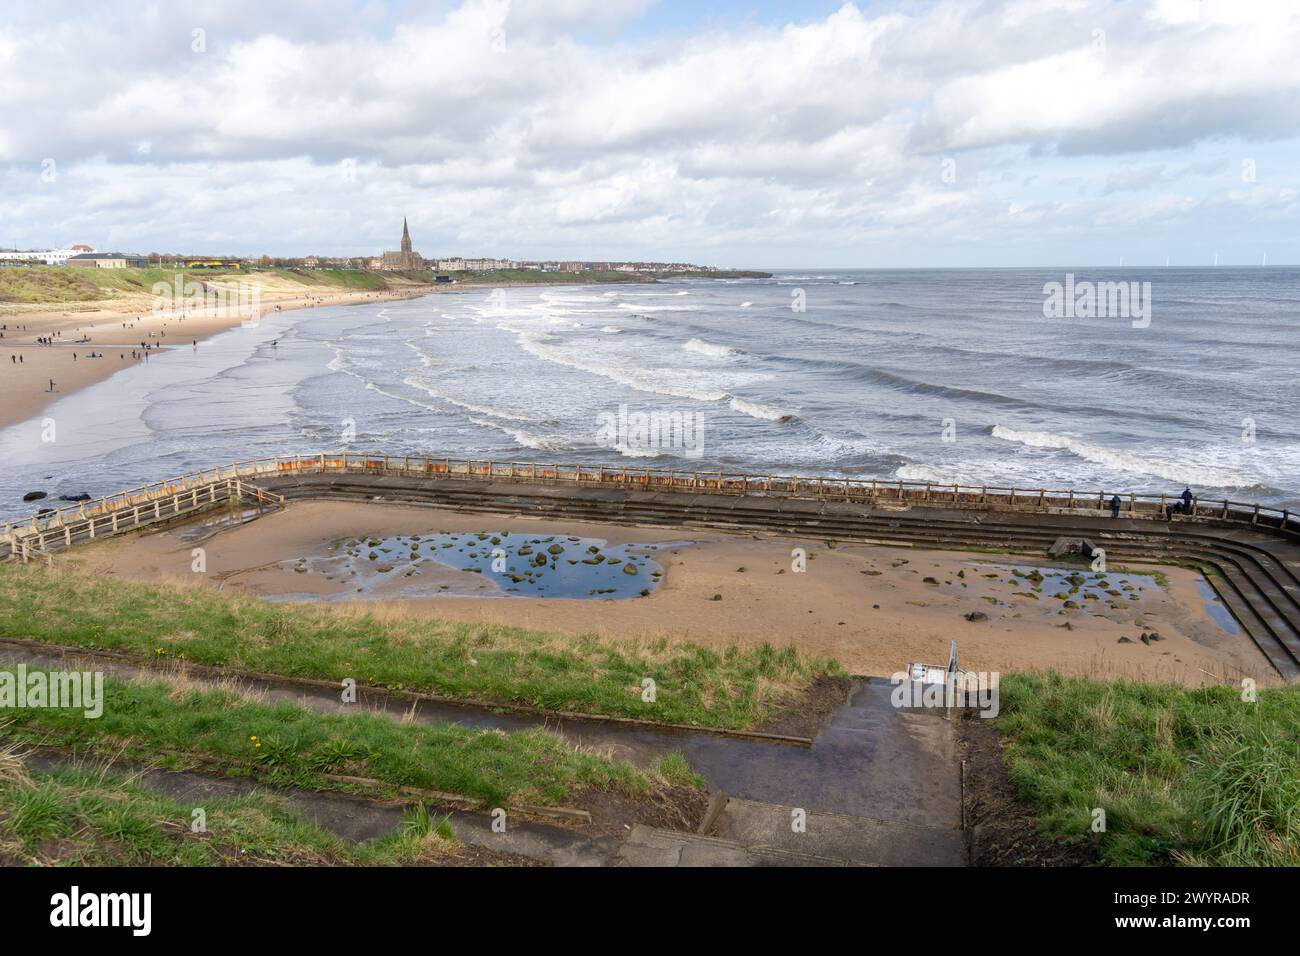 The former Tynemouth Outdoor Swimming Pool by Longsands or Long Sands beach in Tynemouth, North Tyneside, UK. Stock Photo